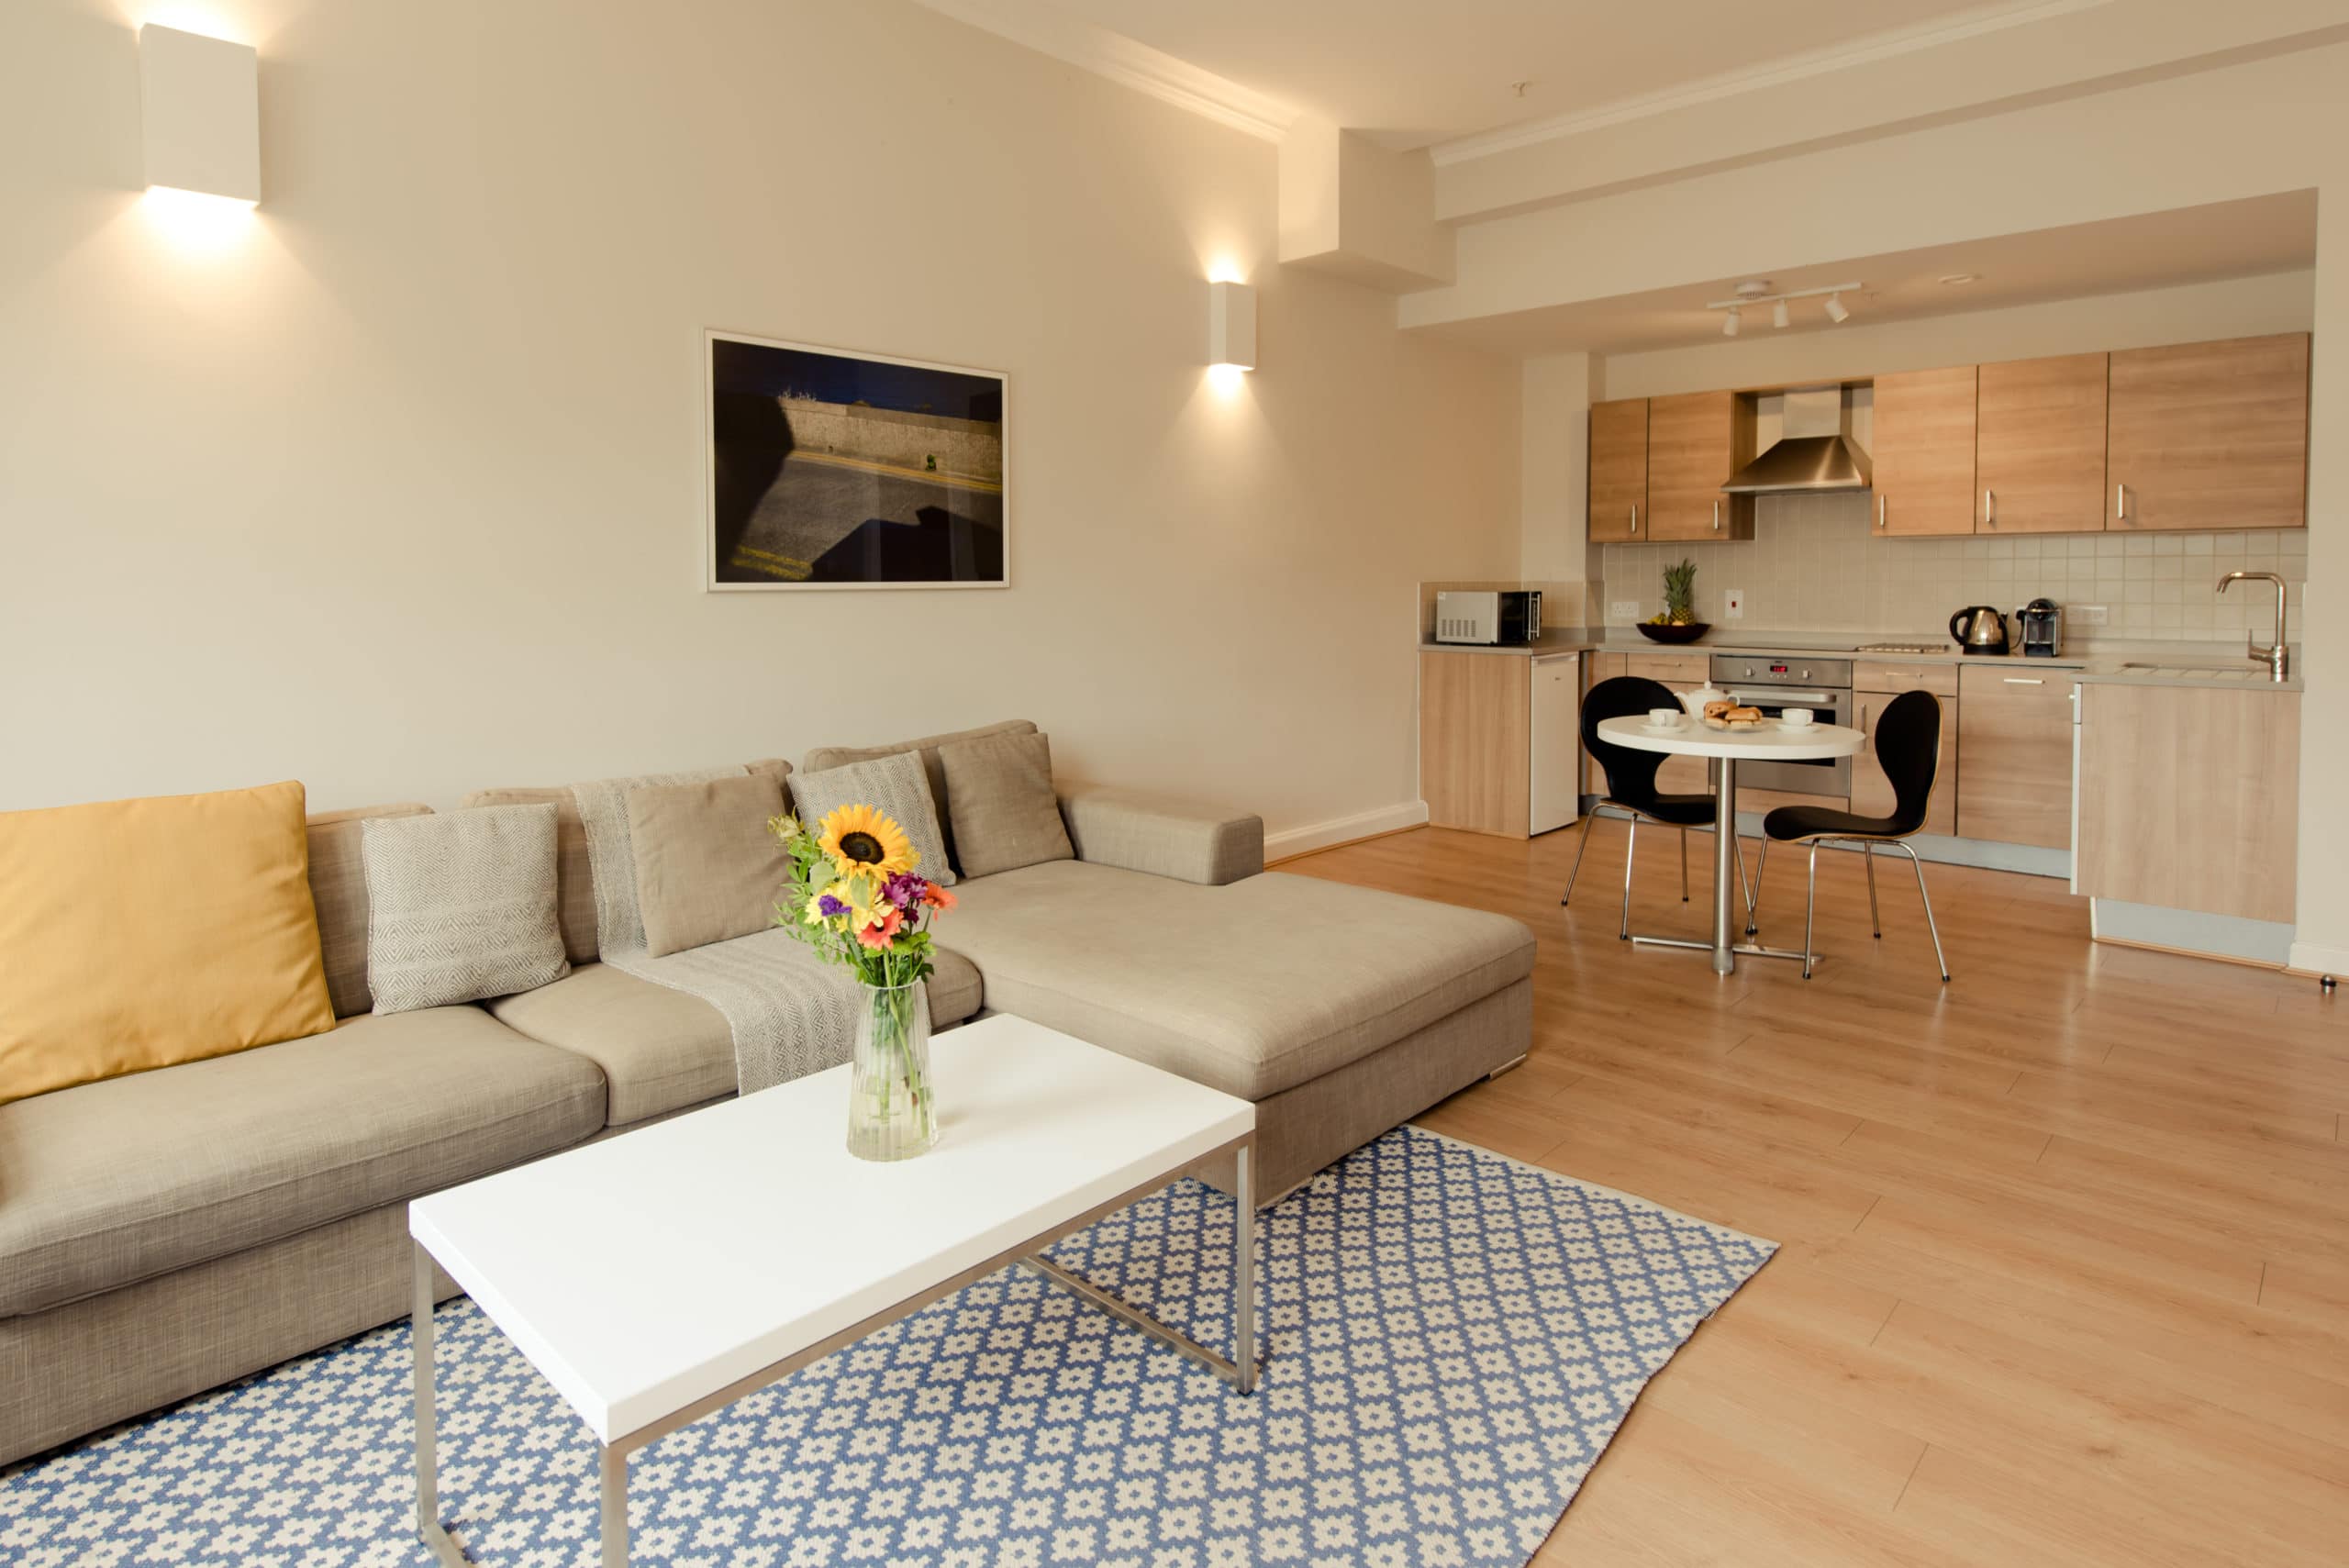 Living area and kitch one bed suite PREMIER SUITES PLUS Glasgow George Square